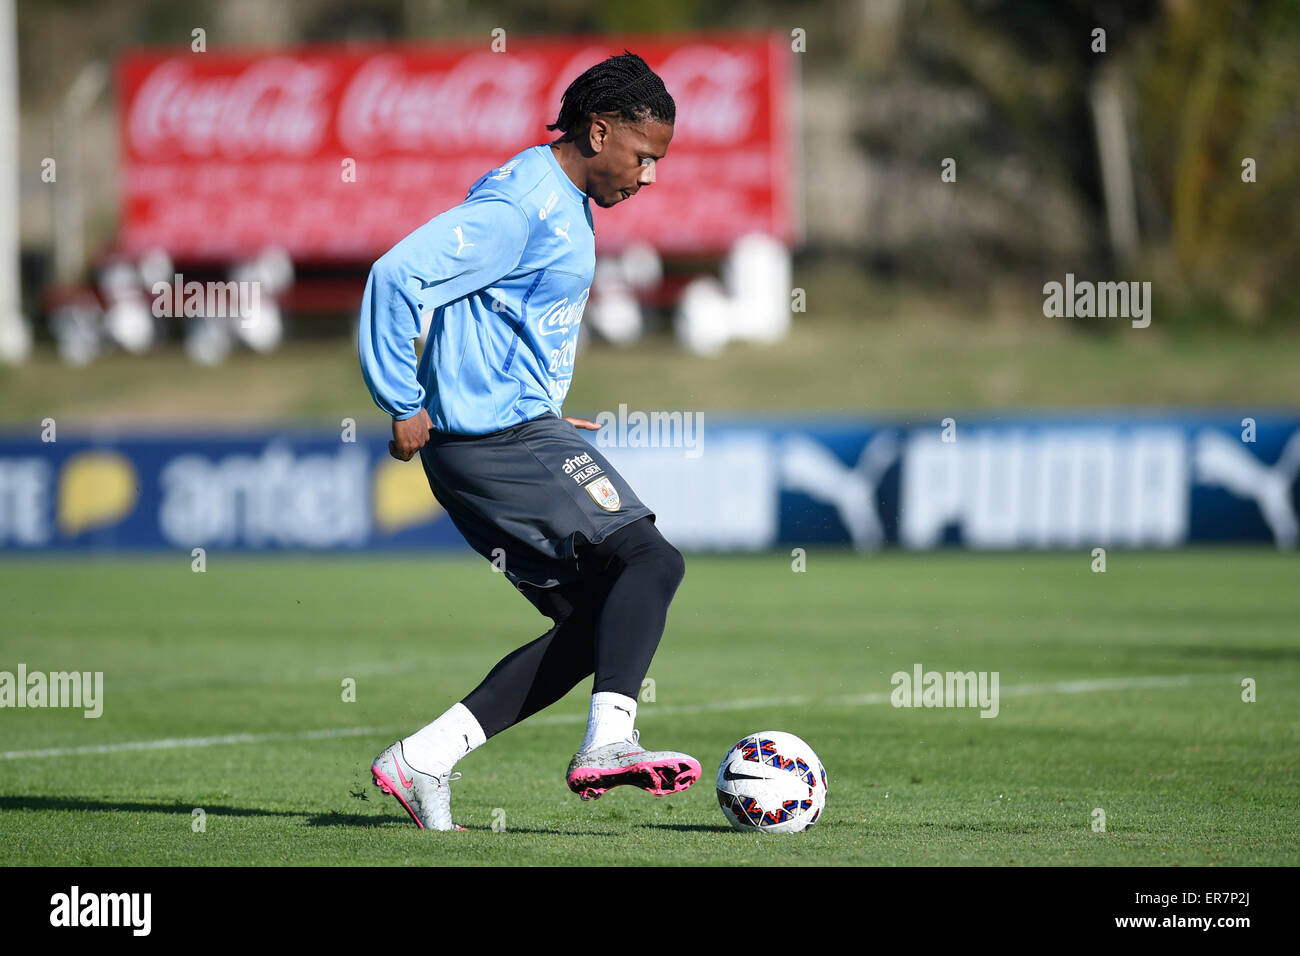 Canelones, Uruguay. 28th May, 2015. Uruguayan National Football Team player Abel Hernandez takes part in a training session, at Uruguay Celeste sports complex, in Canelones, 30km from Montevideo, capital of Uruguay, on May 28, 2015. Uruguayan National Football Team prepared to take part in the Copa America 2015, to be held from June 11 to July 4 in Chile. © Nicolas Celaya/Xinhua/Alamy Live News Stock Photo